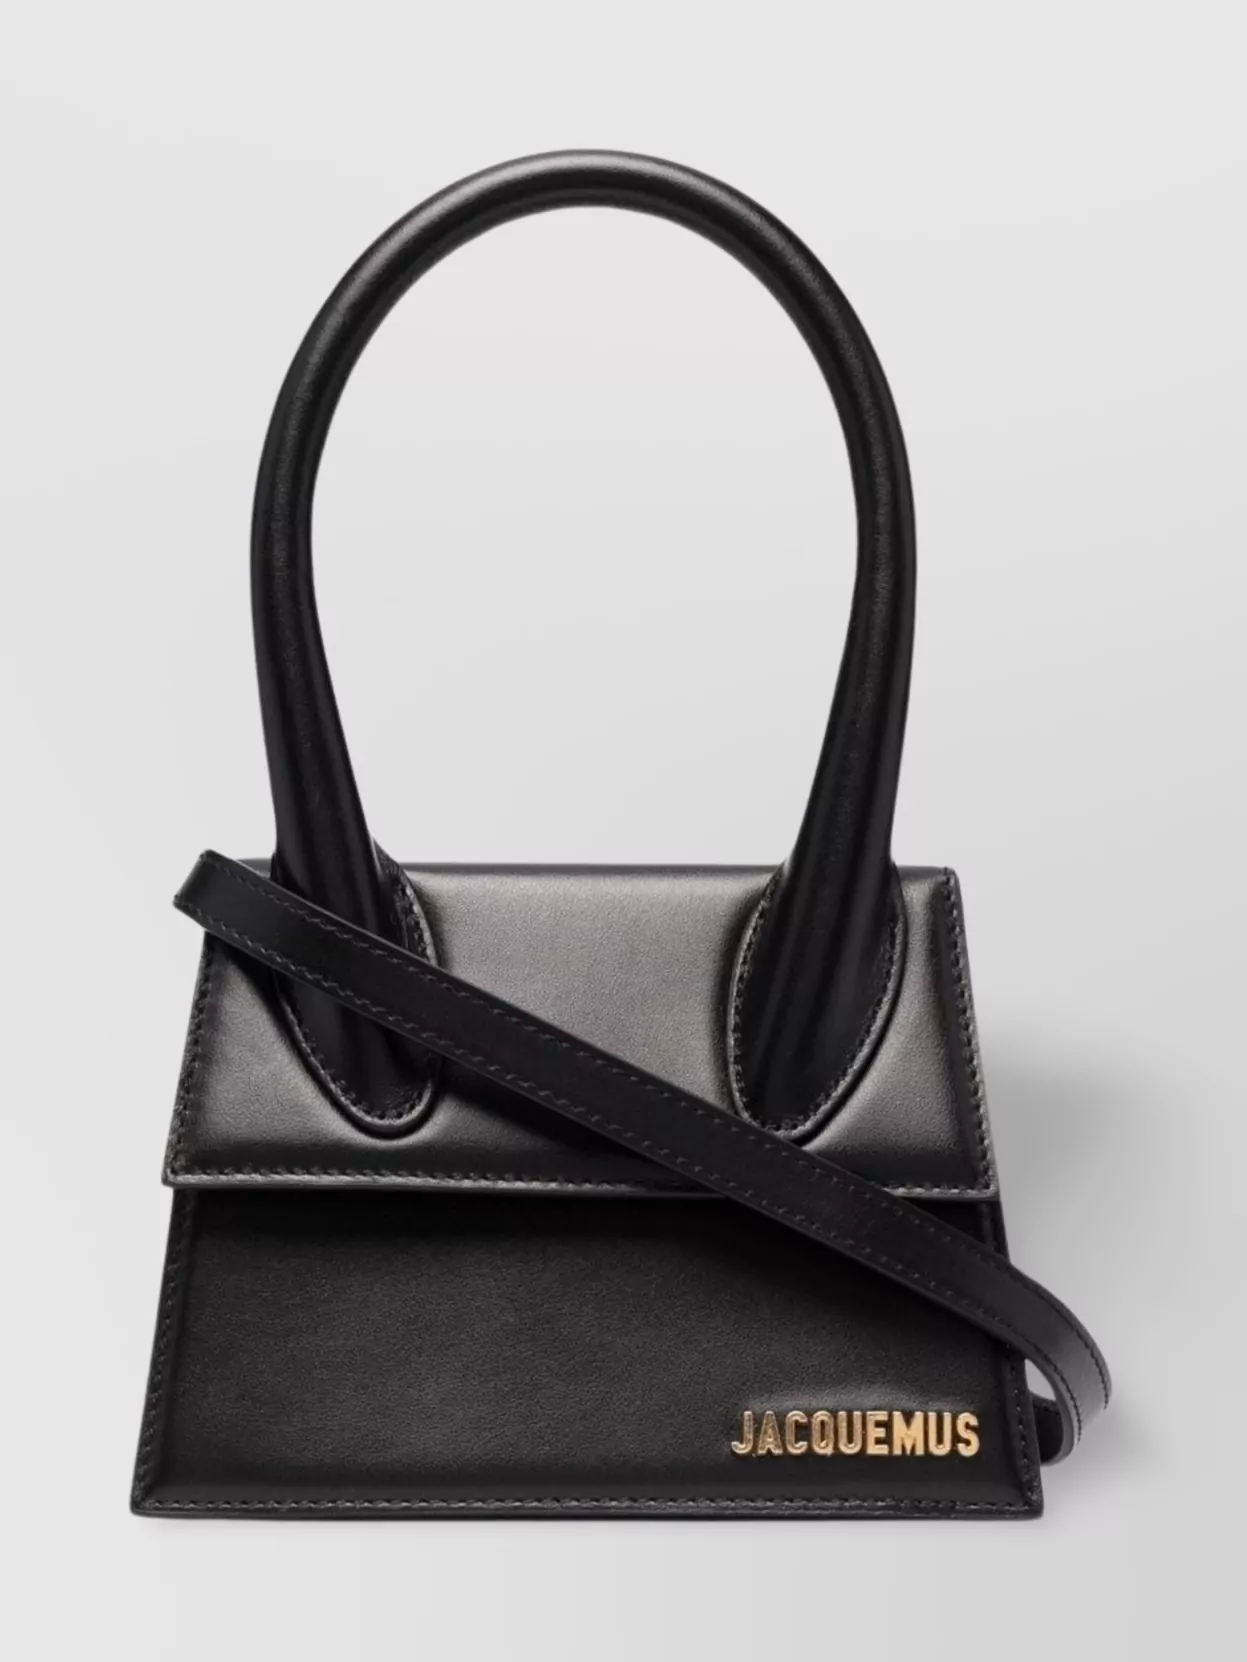 Jacquemus Chic Medium Tote With Handle And Strap